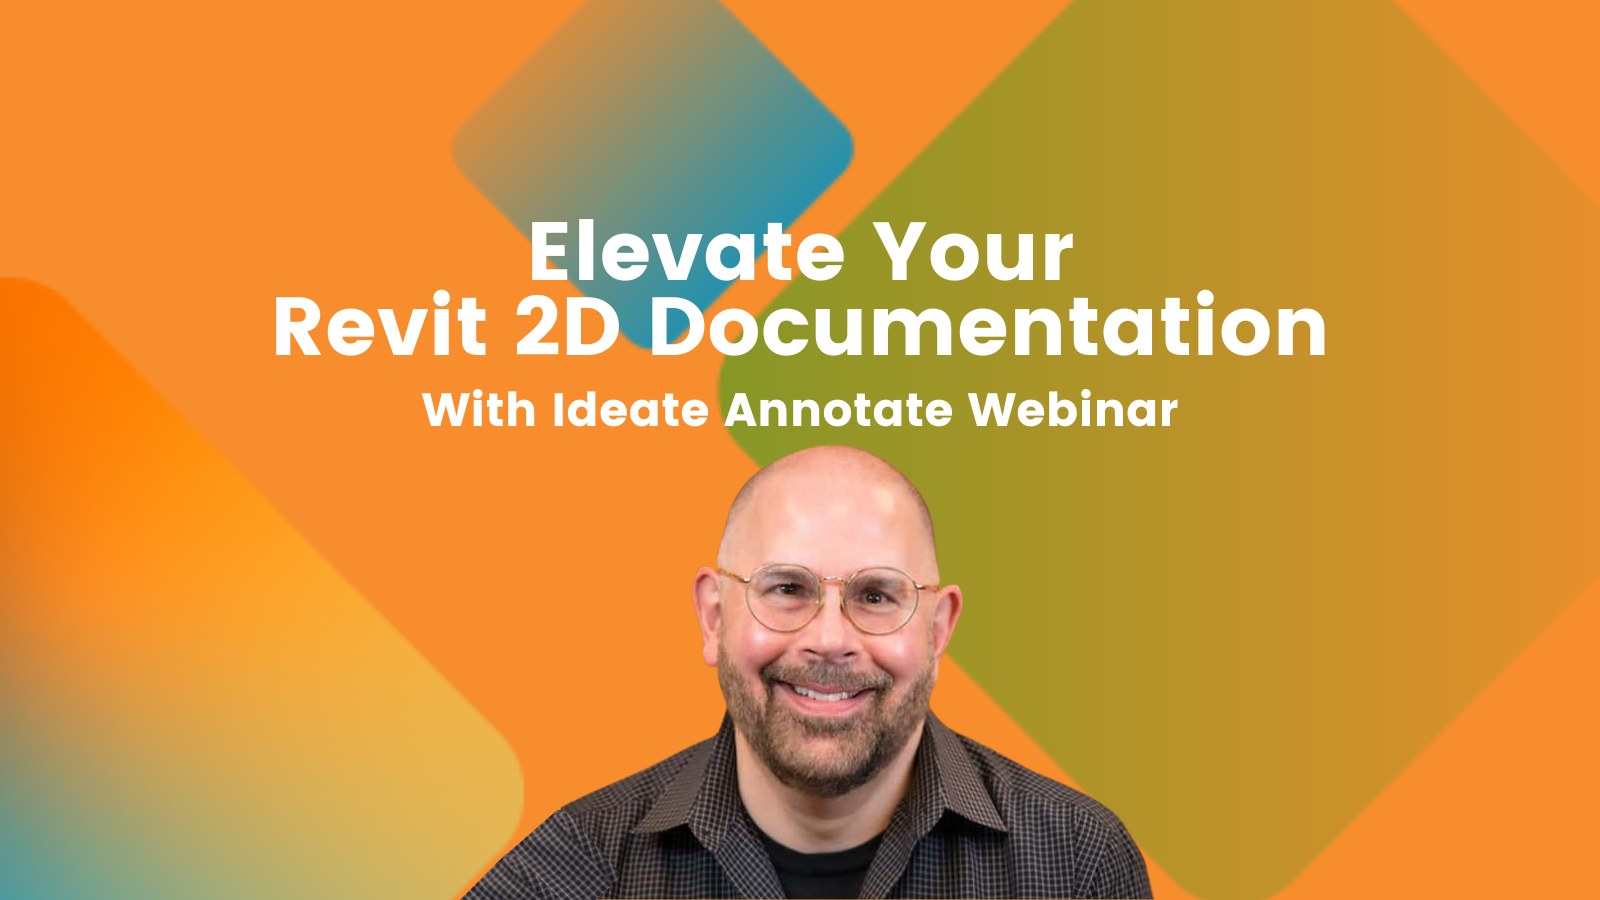 Elevate Your Revit Projects with Ideate Annotate